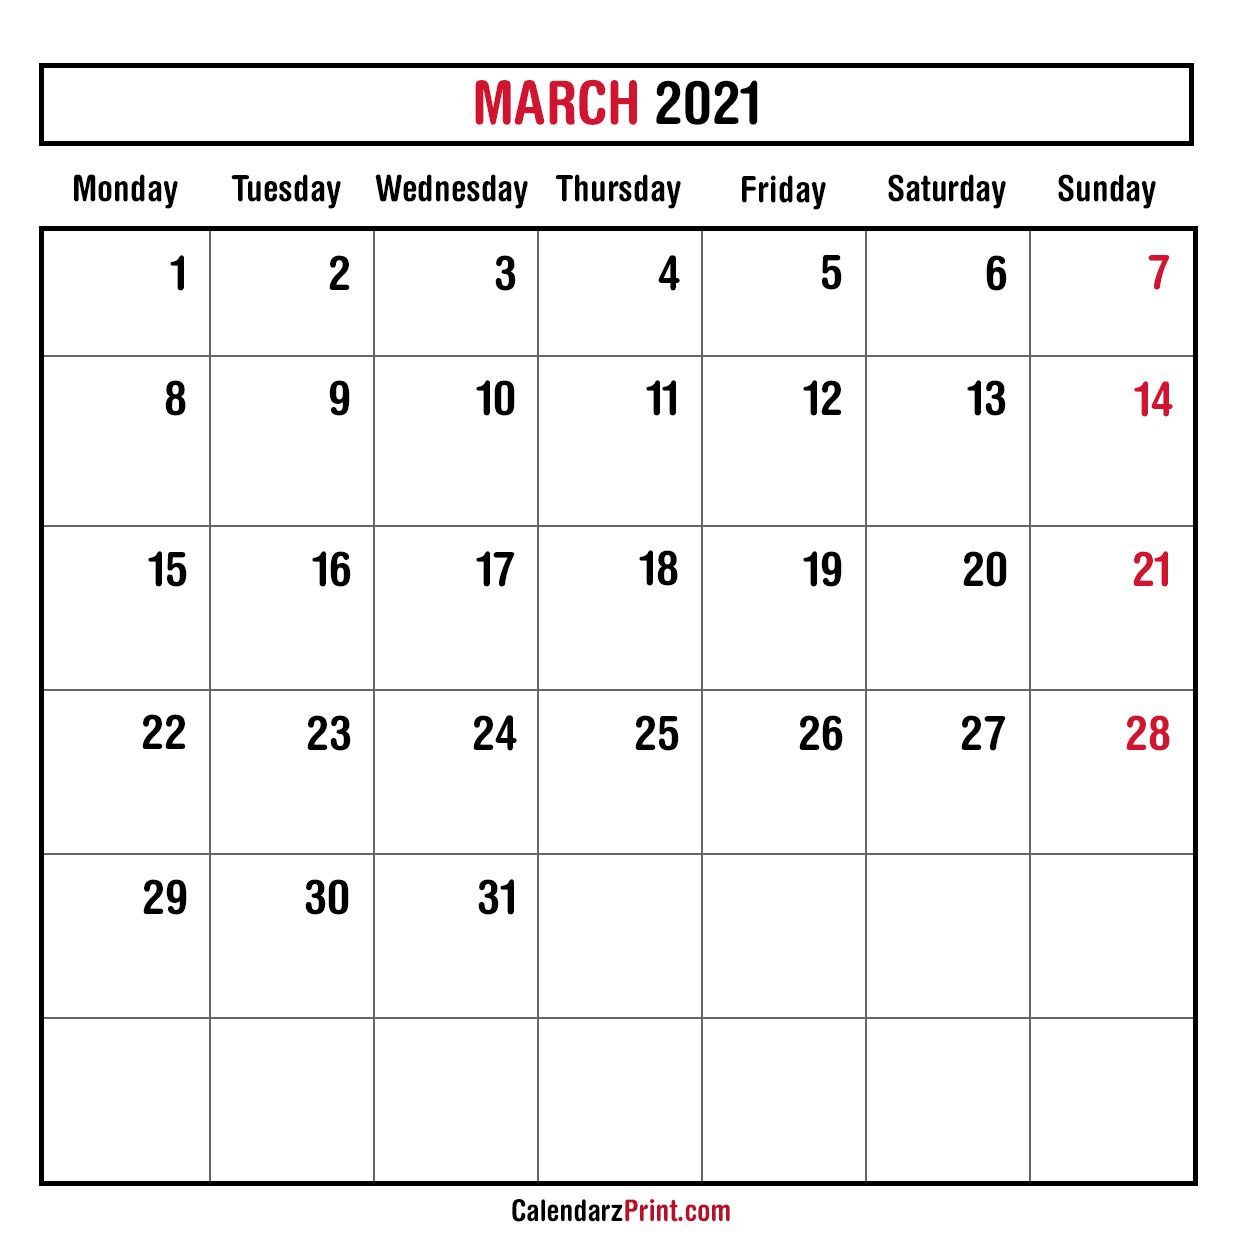 March 2021 Monthly Planner Calendar, Printable Free